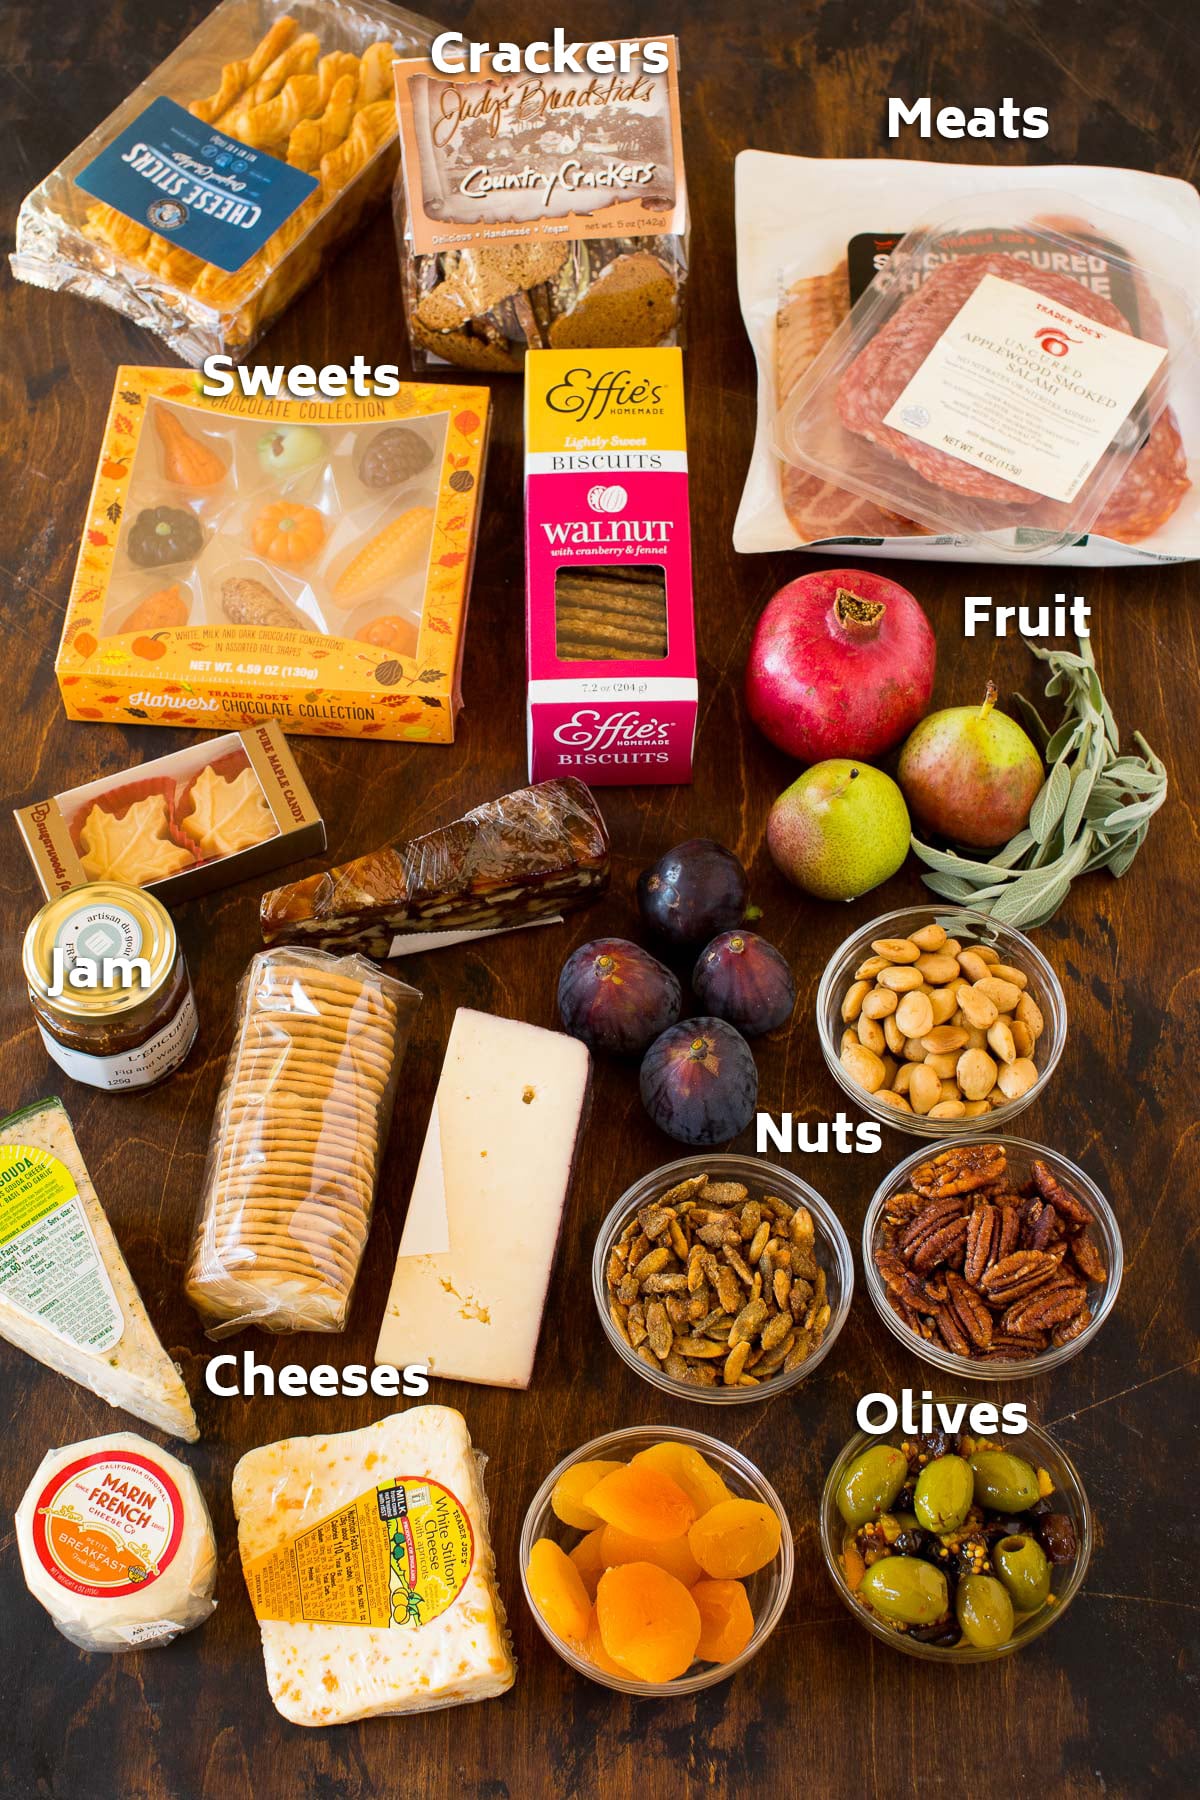 Packages of ingredients including crackers, nuts, olives and cheeses.